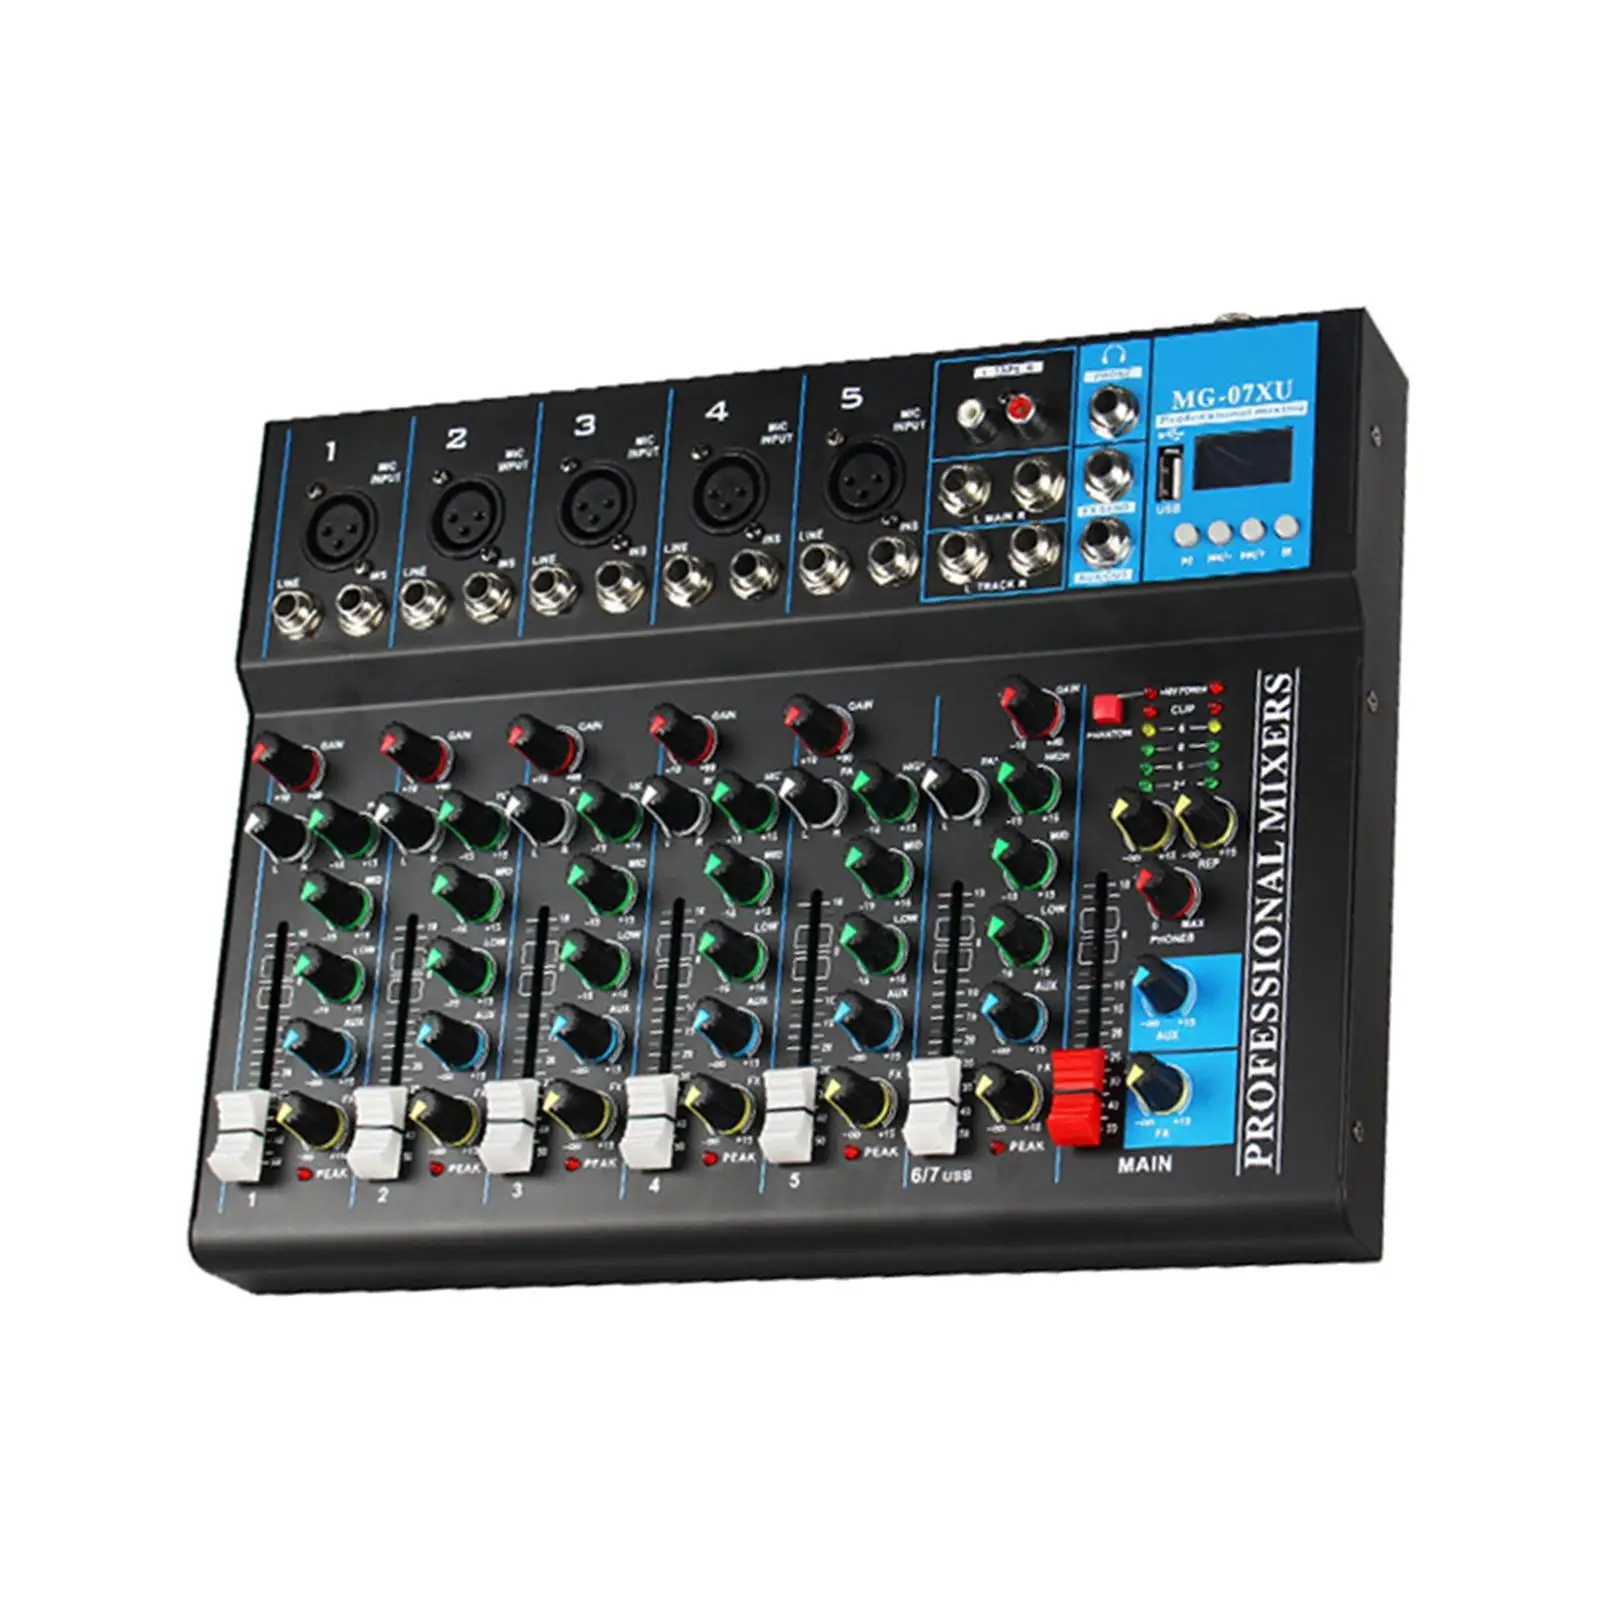 Audio Mixer Premium  Backlit LCD Display Input Output MP3 Sound Board Controller for Studio Party Computer Live Gigs Recording